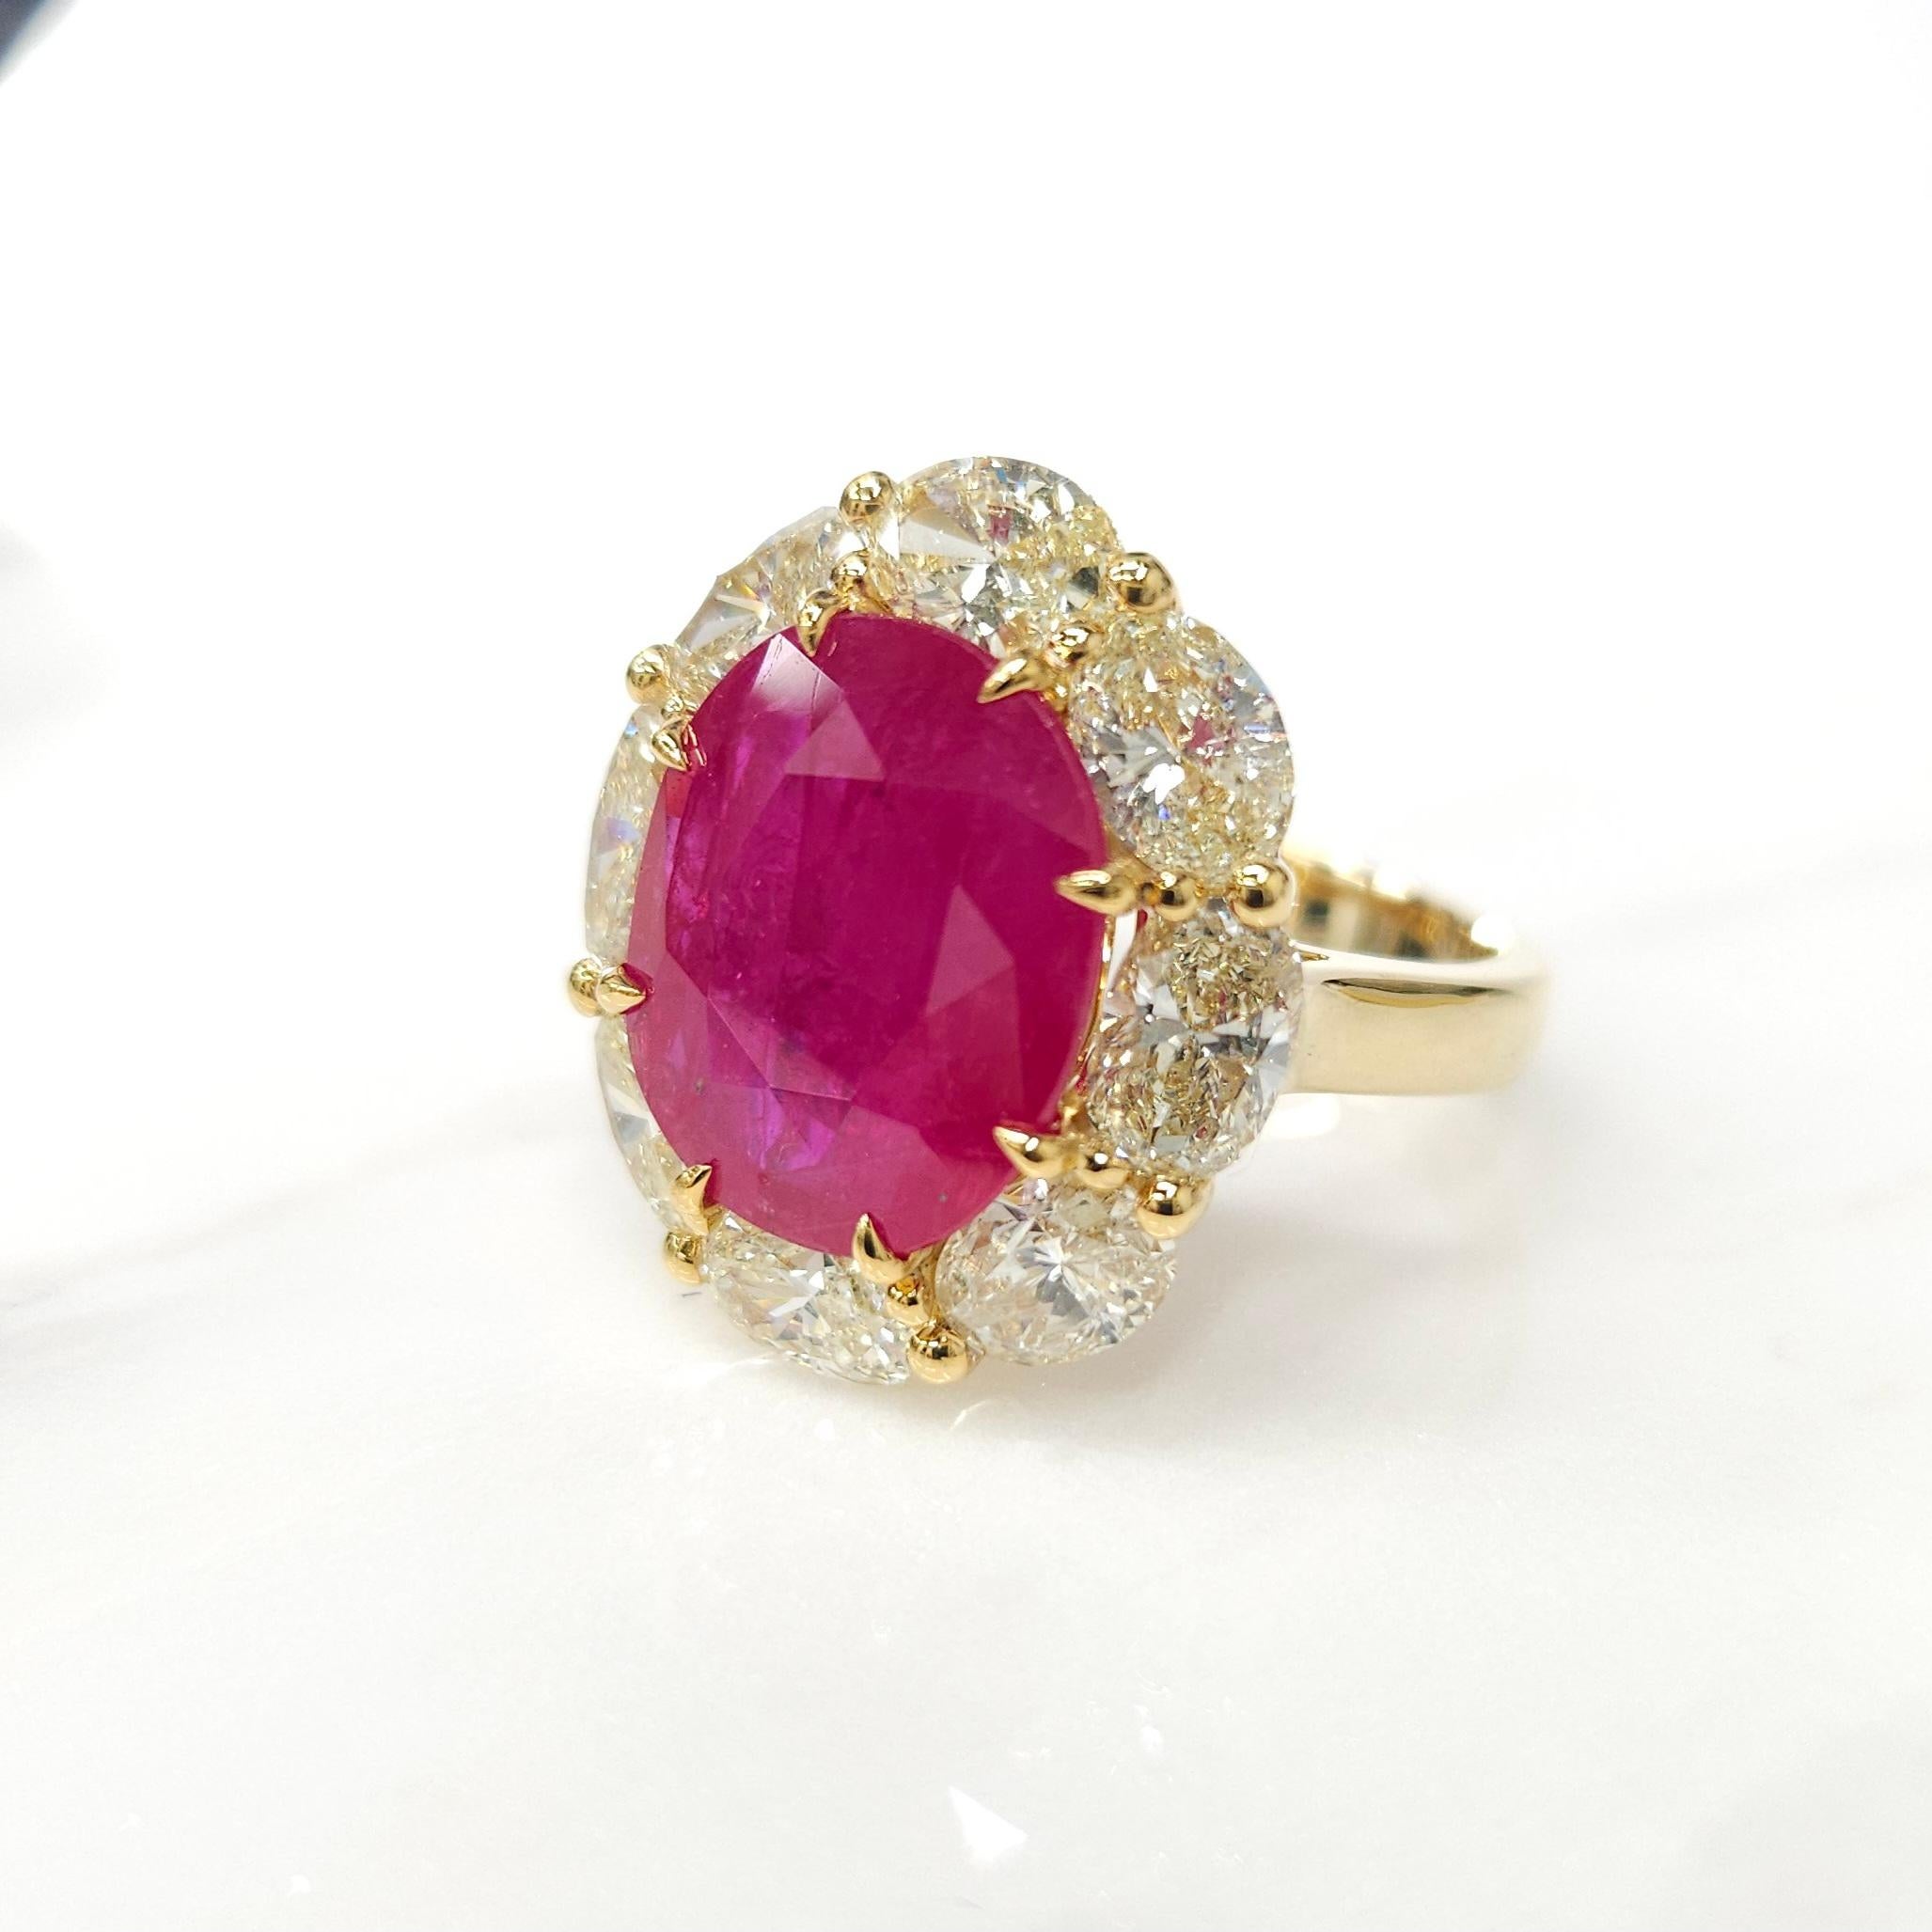 IGI Certified 6.53 Carat Ruby & 3.71 Carat Oval Diamond Ring in 18K Yellow Gold For Sale 8